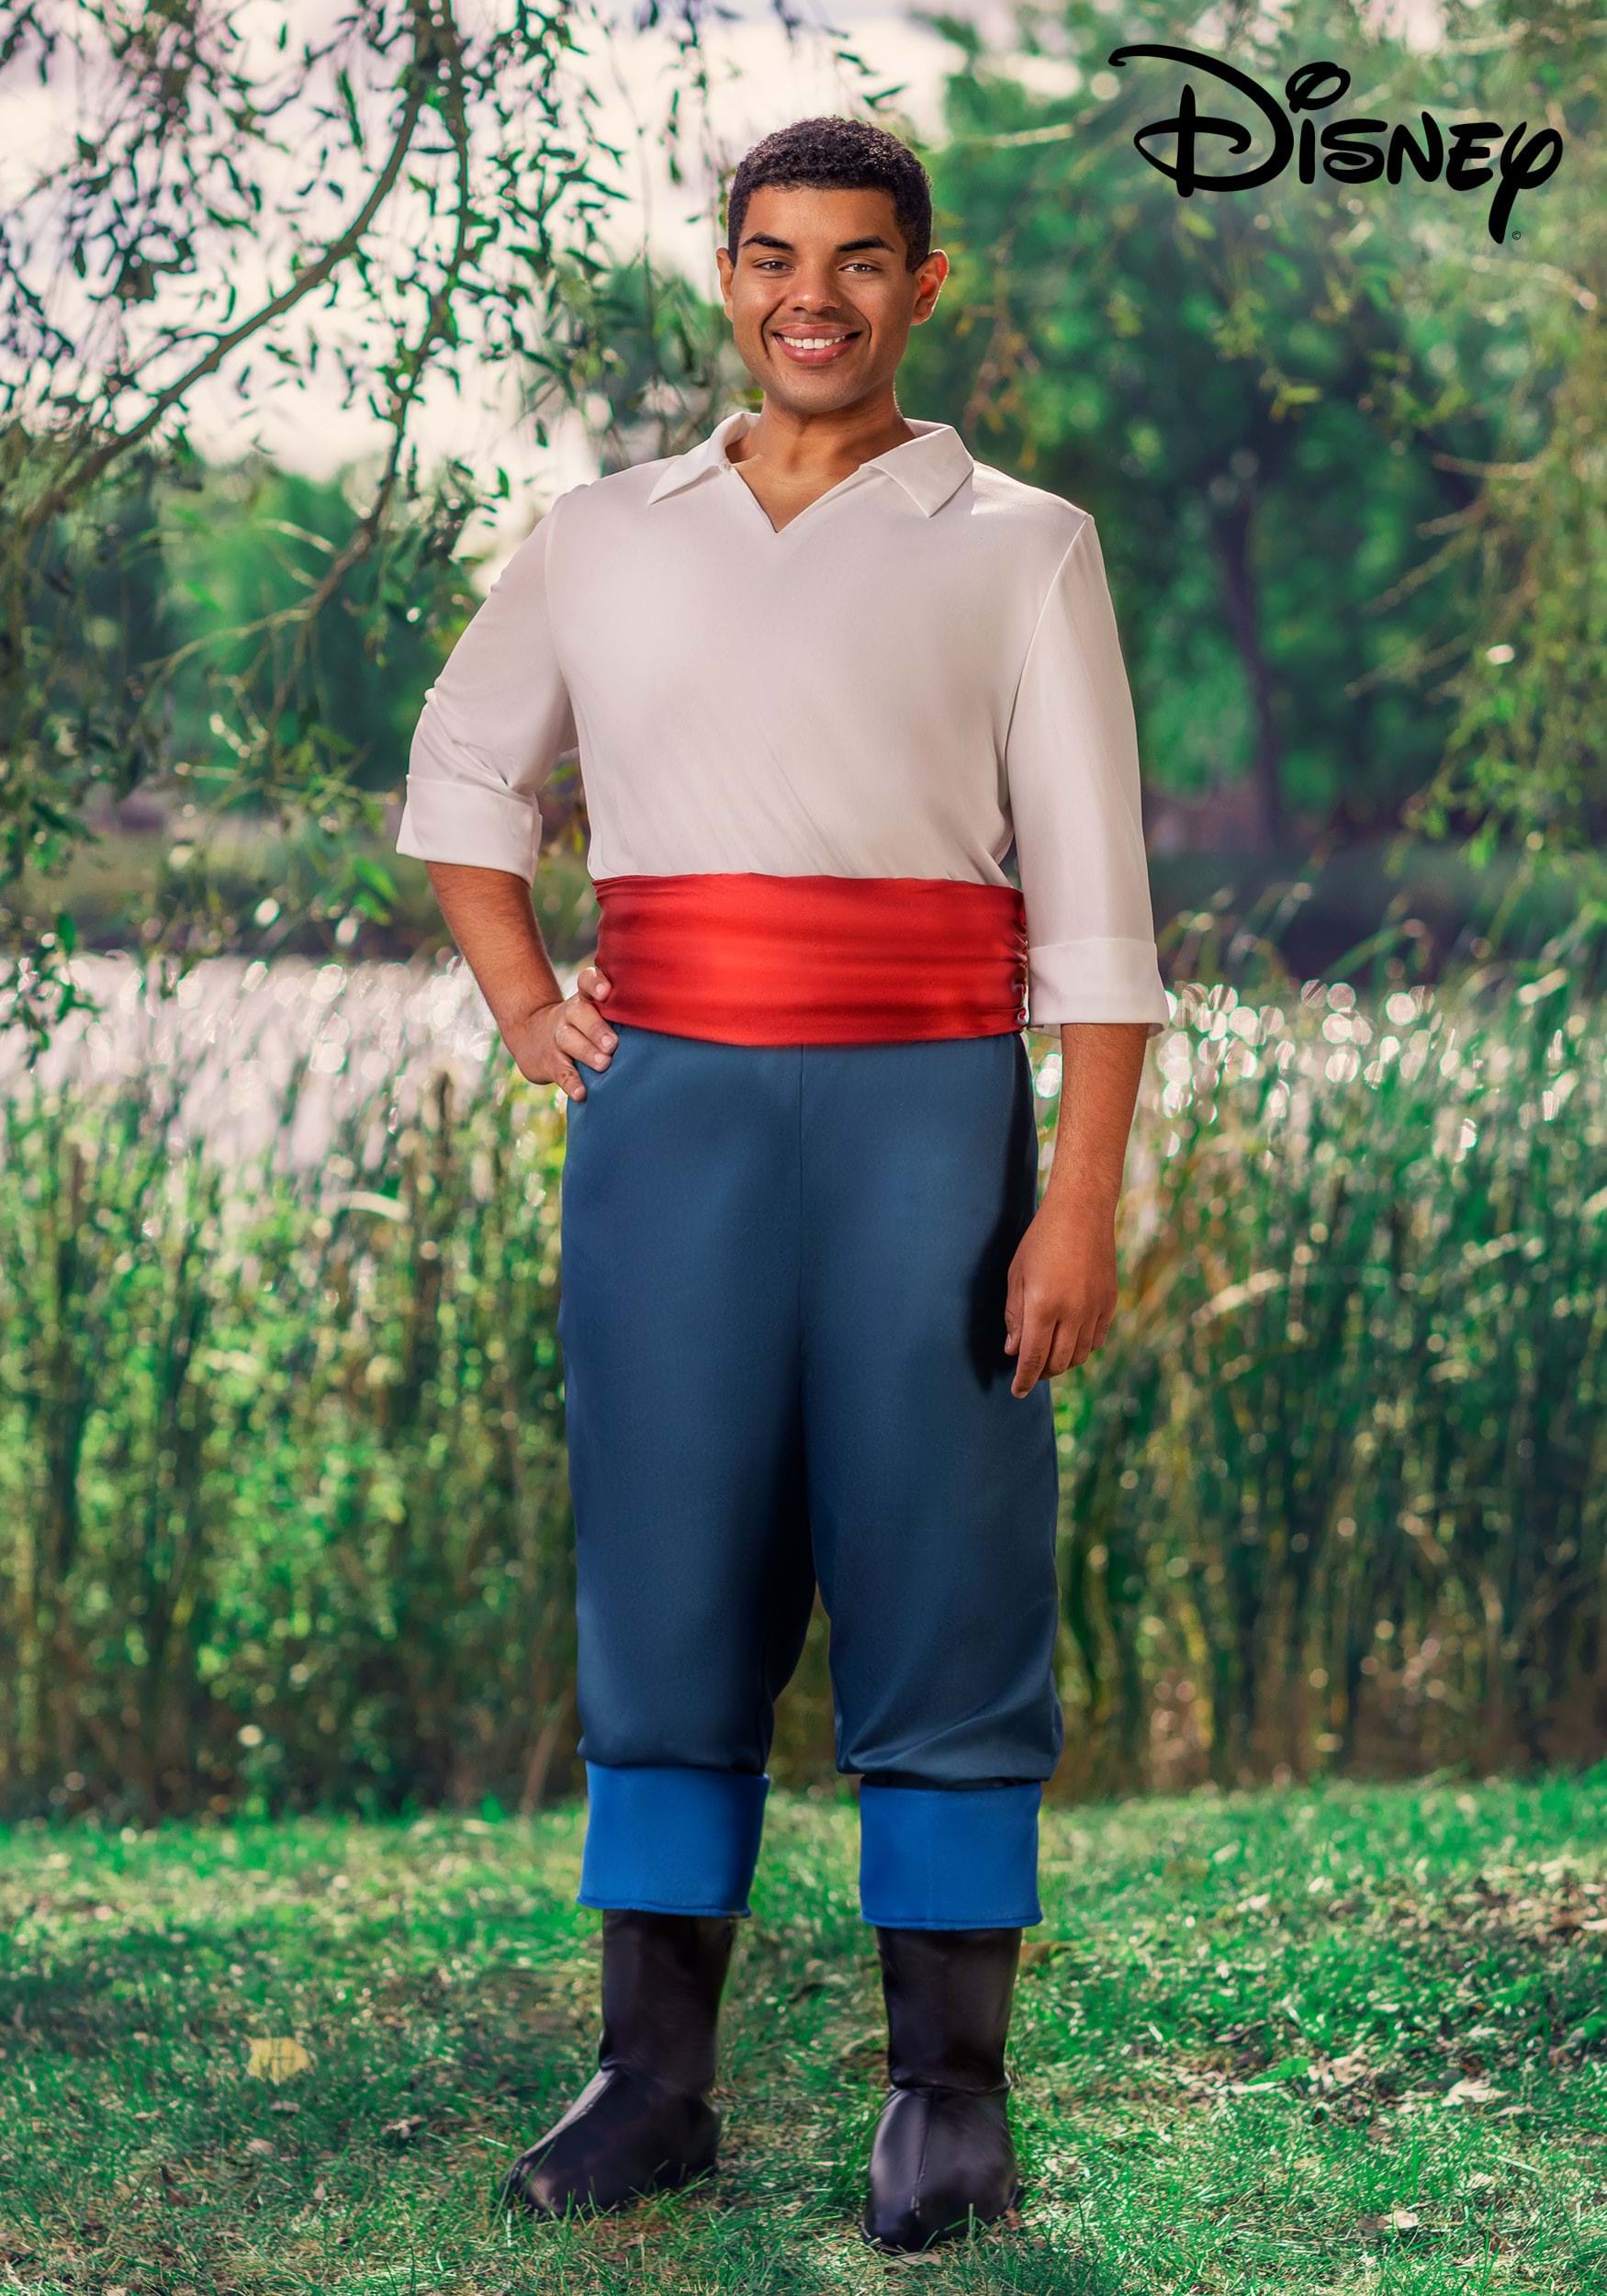 https://images.fun.com/products/74641/1-1/adult-plus-size-disney-prince-eric-costume.jpg